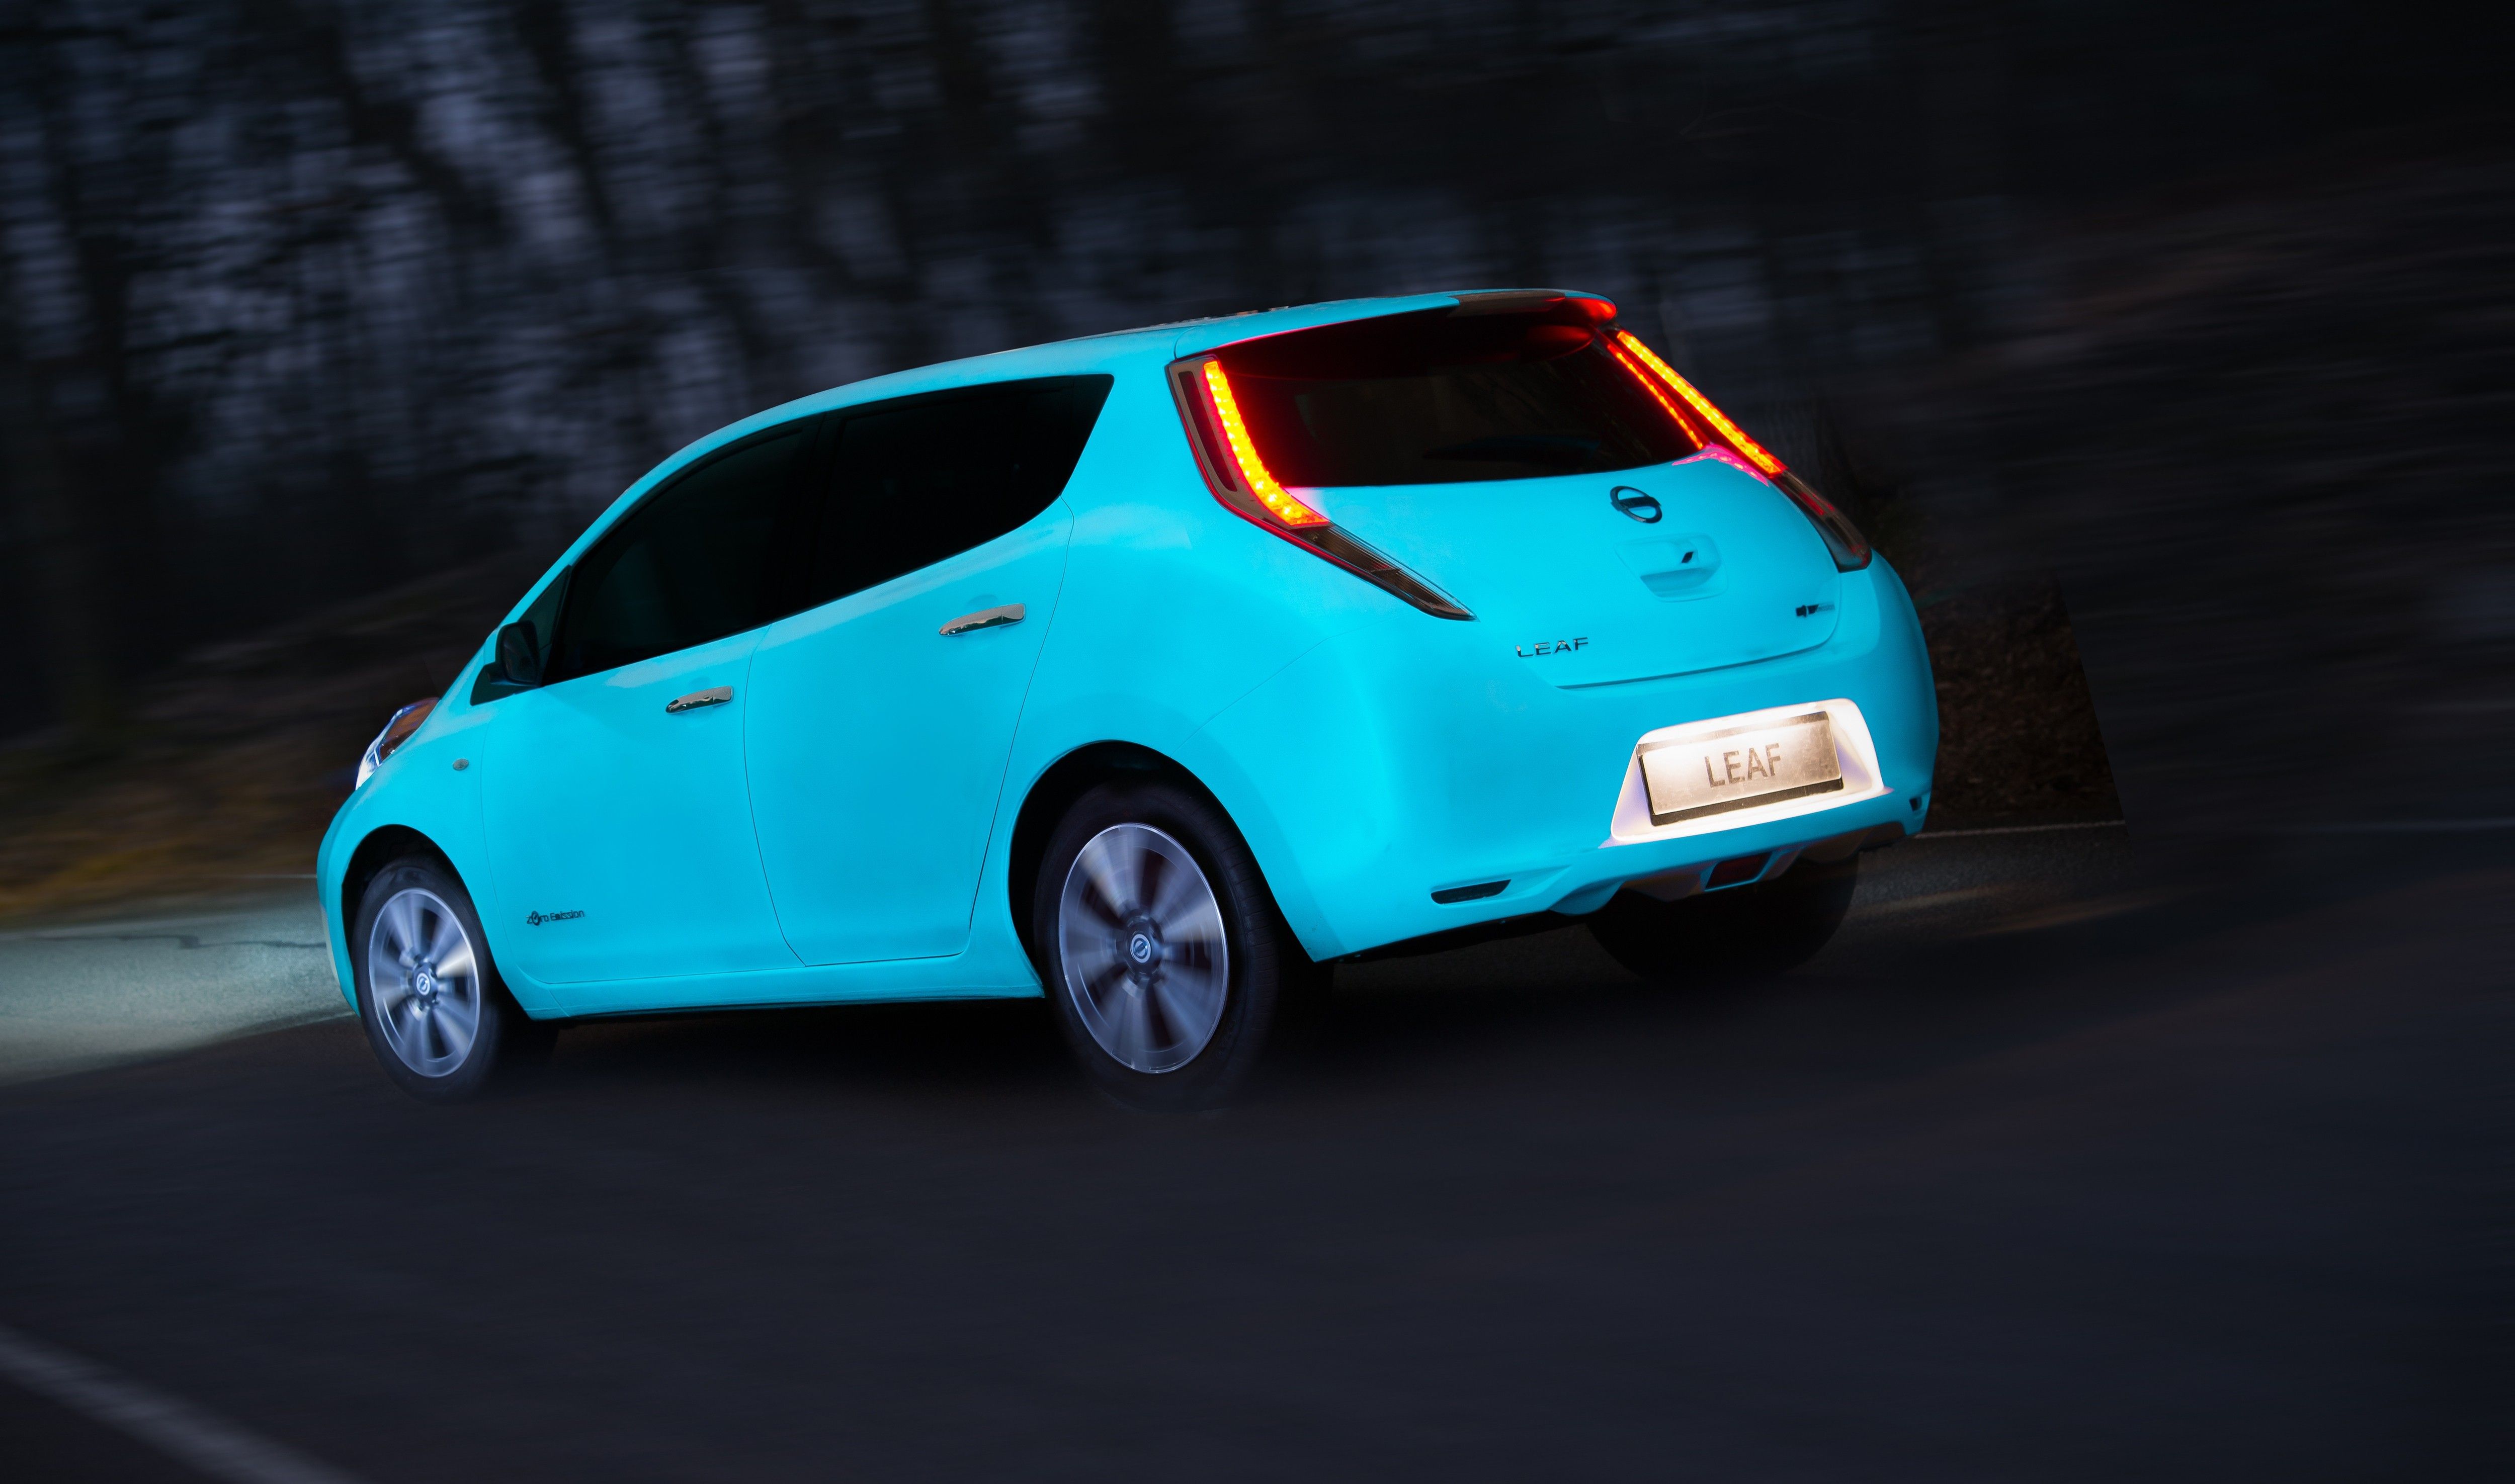 nissan coated a nissan leaf with special paint that glows at night image 1